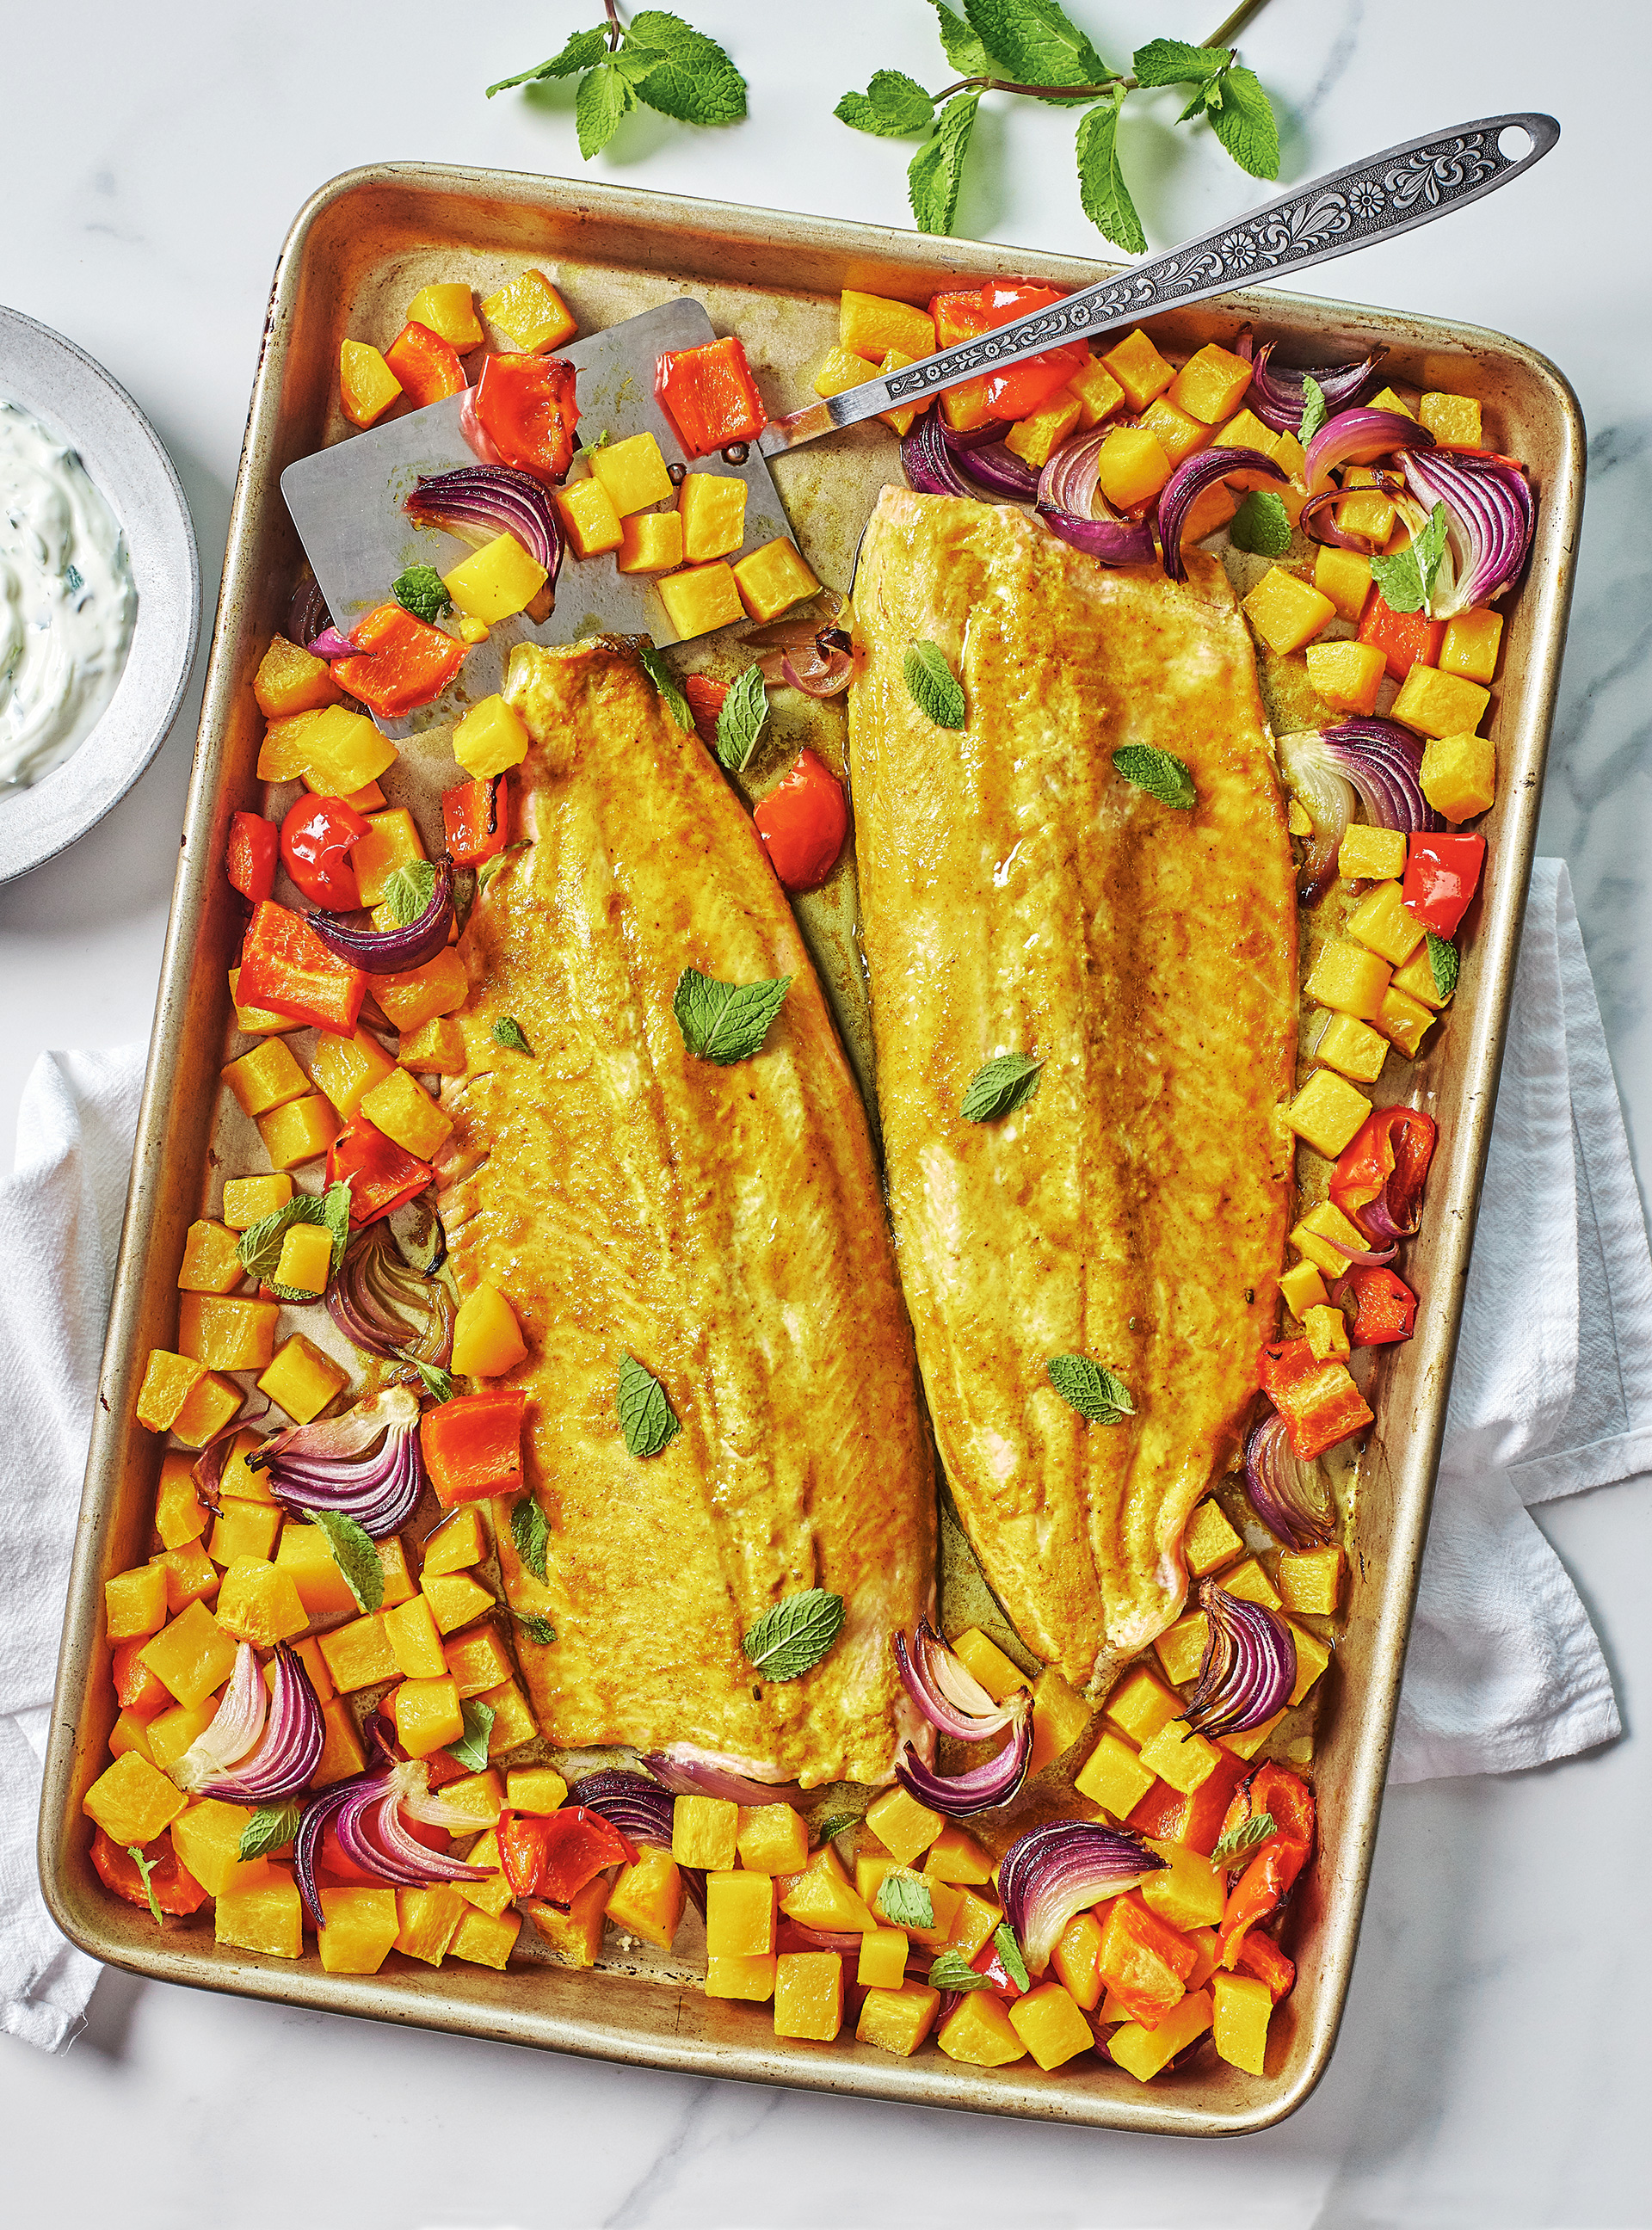 Sheet-Pan Curried Vegetables and Trout